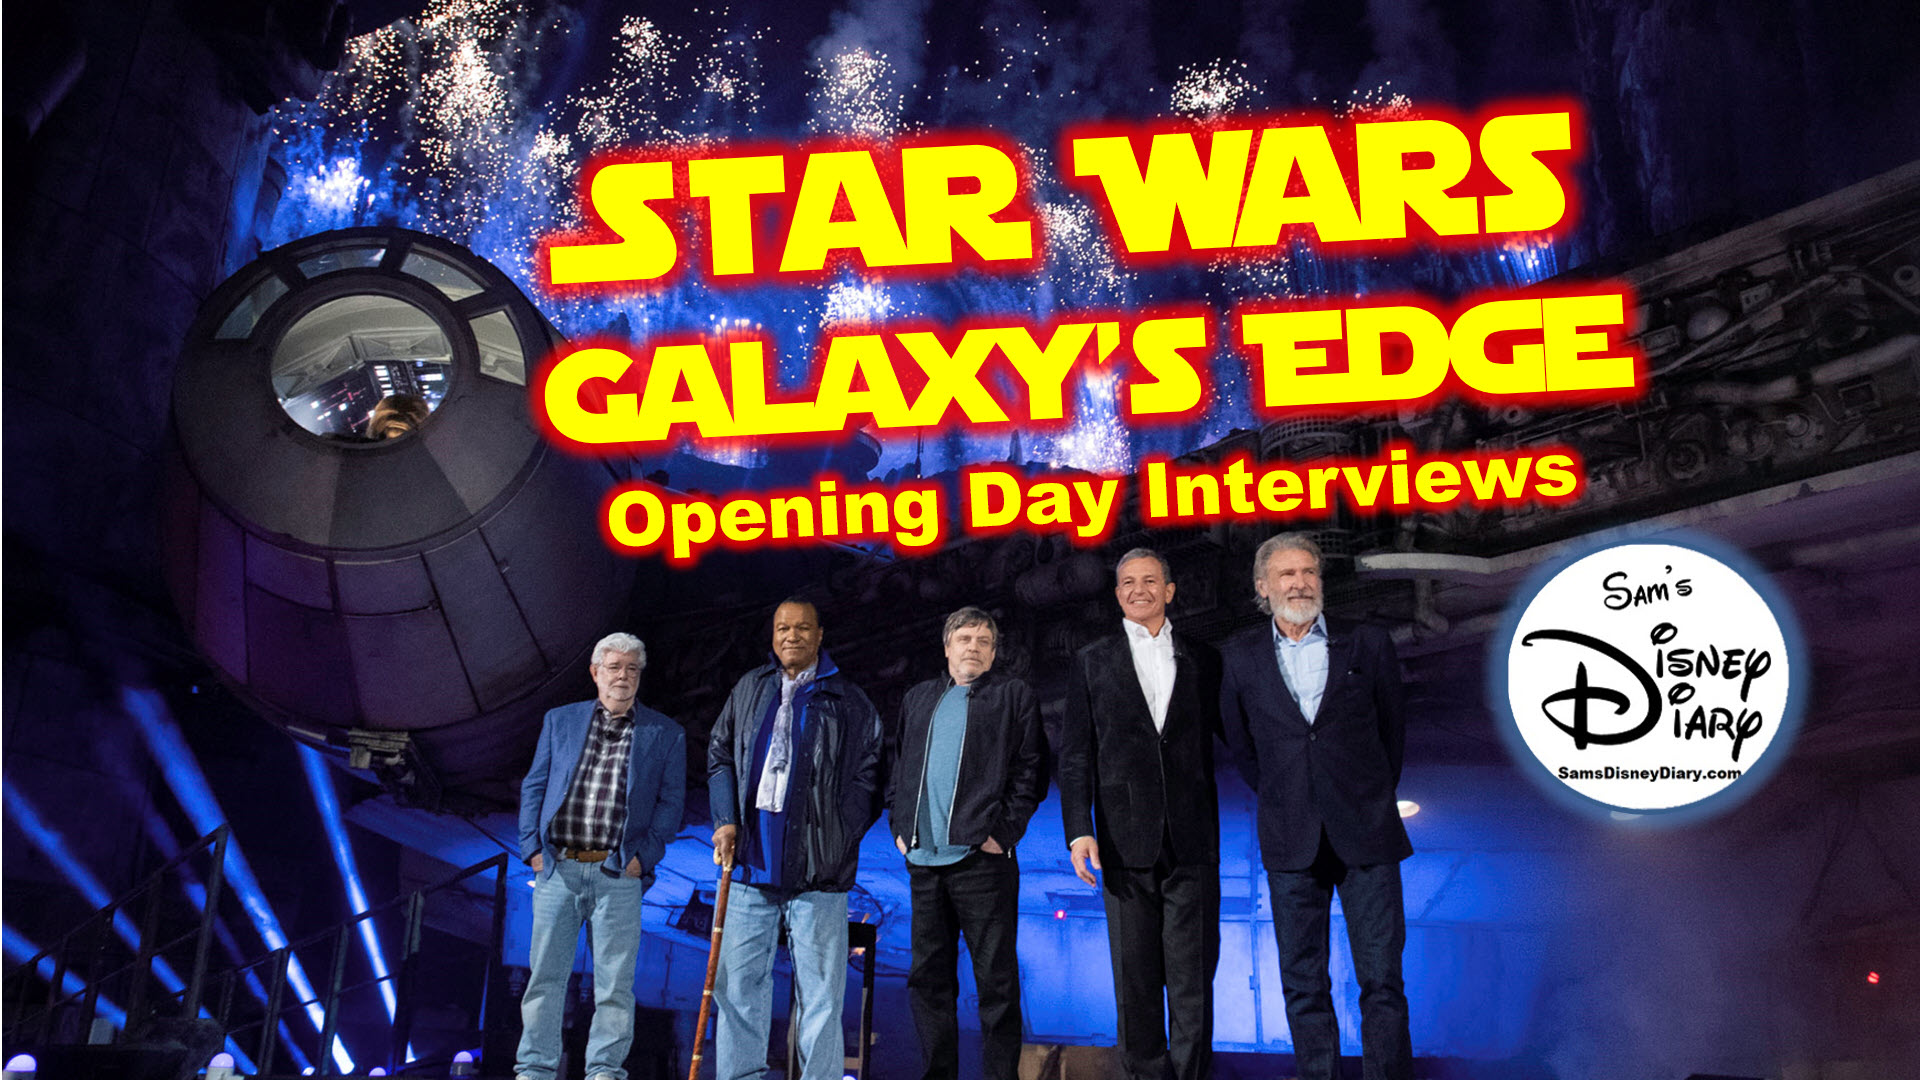 Star Wars Galaxy's Edge Opening Day Interviews and imaginer first look